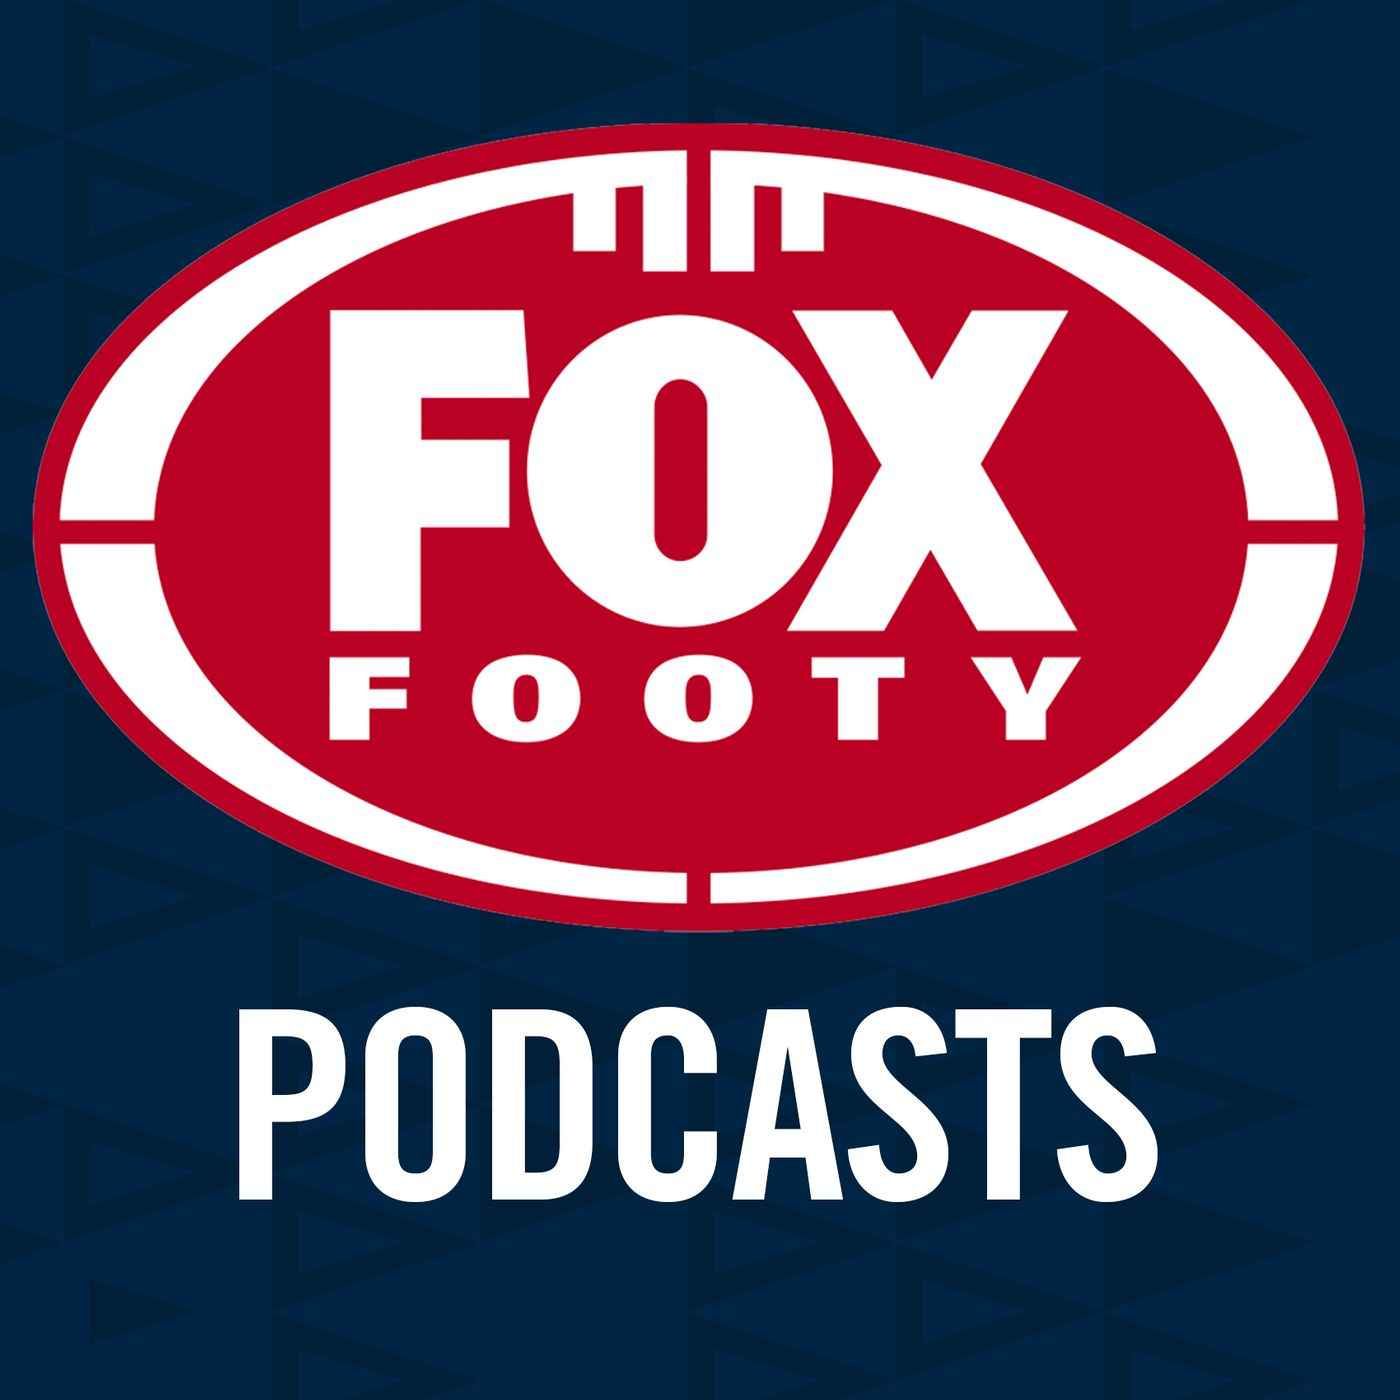 Fox Footy Podcast: Gather Round winners and losers